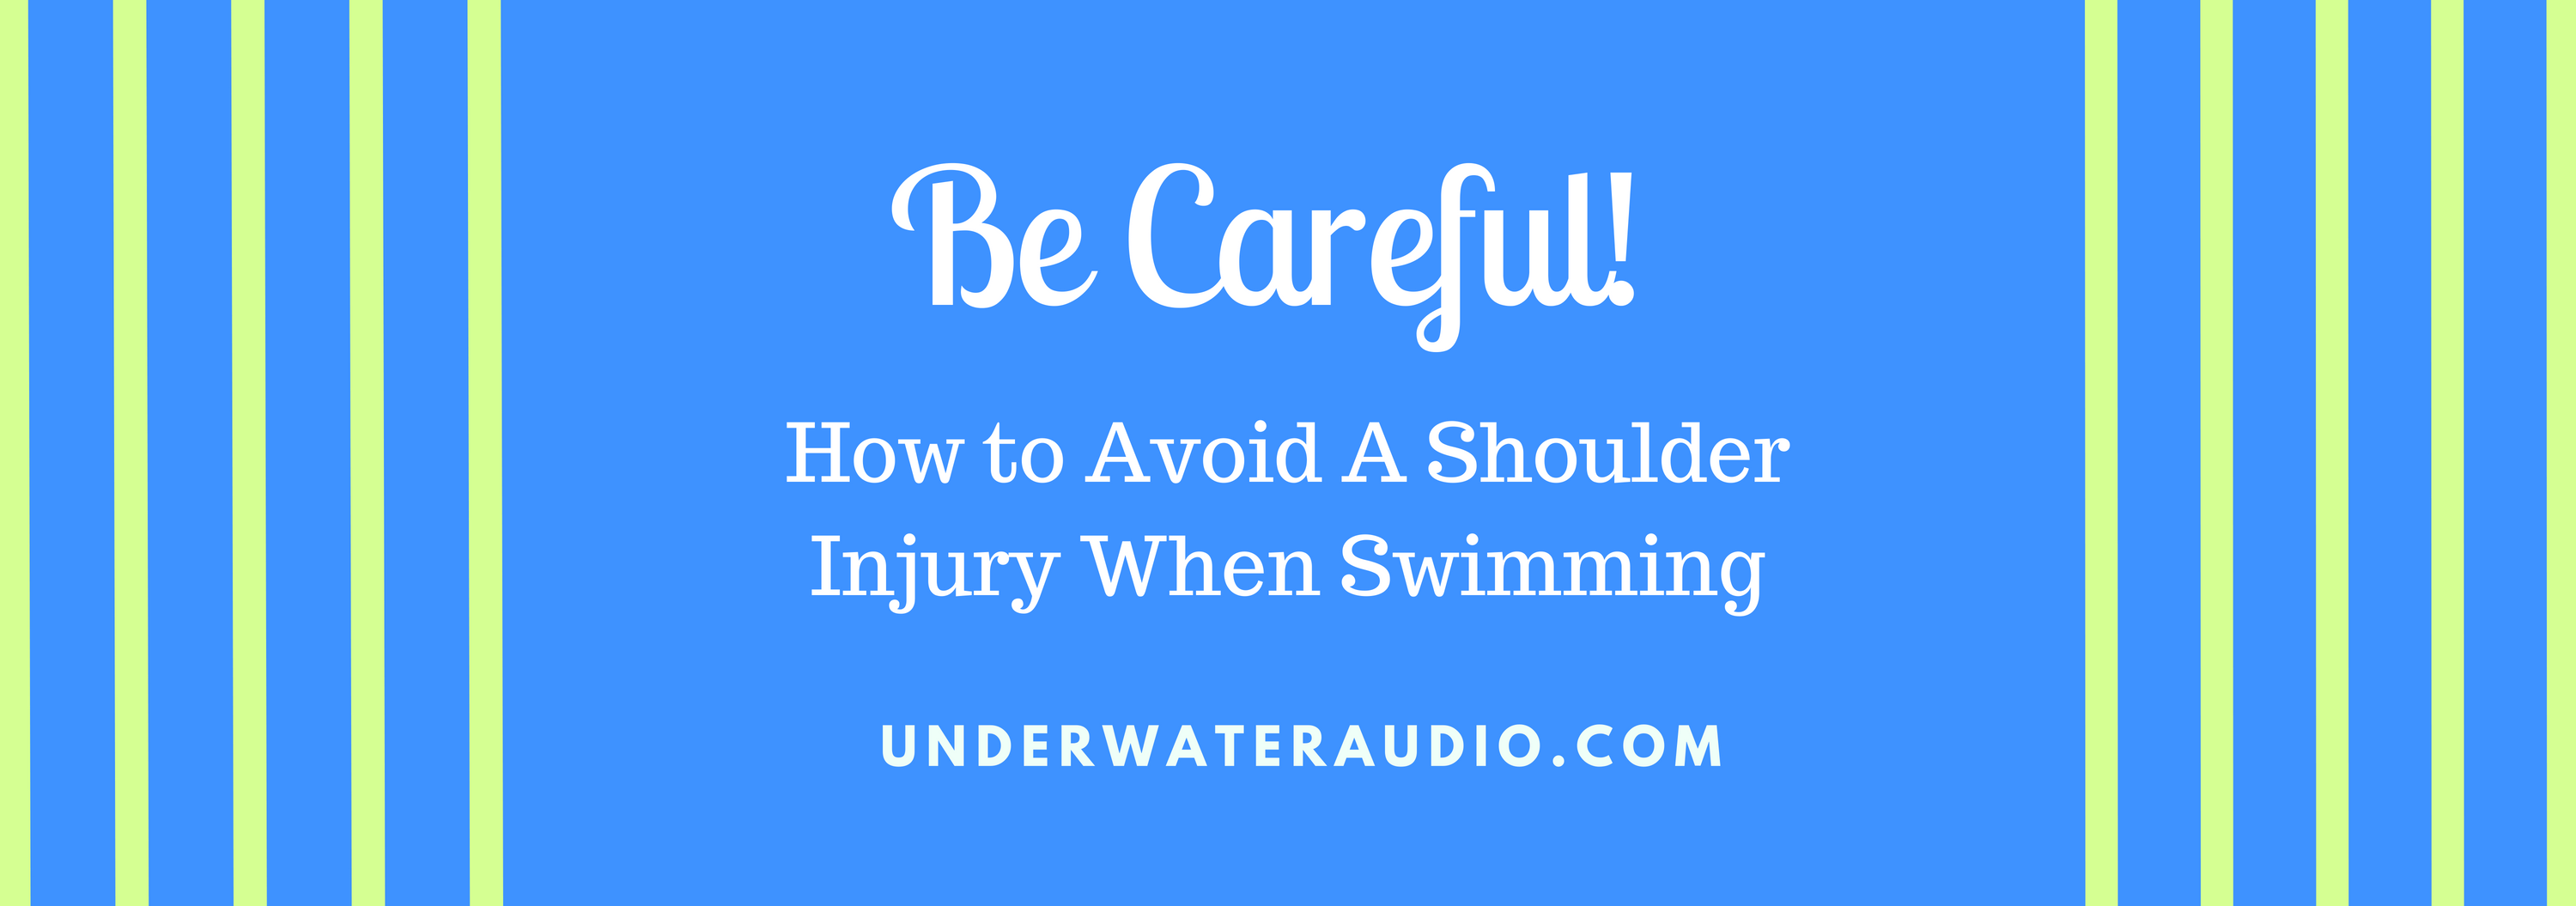 Be Careful! How to Avoid A Shoulder Injury When Swimming